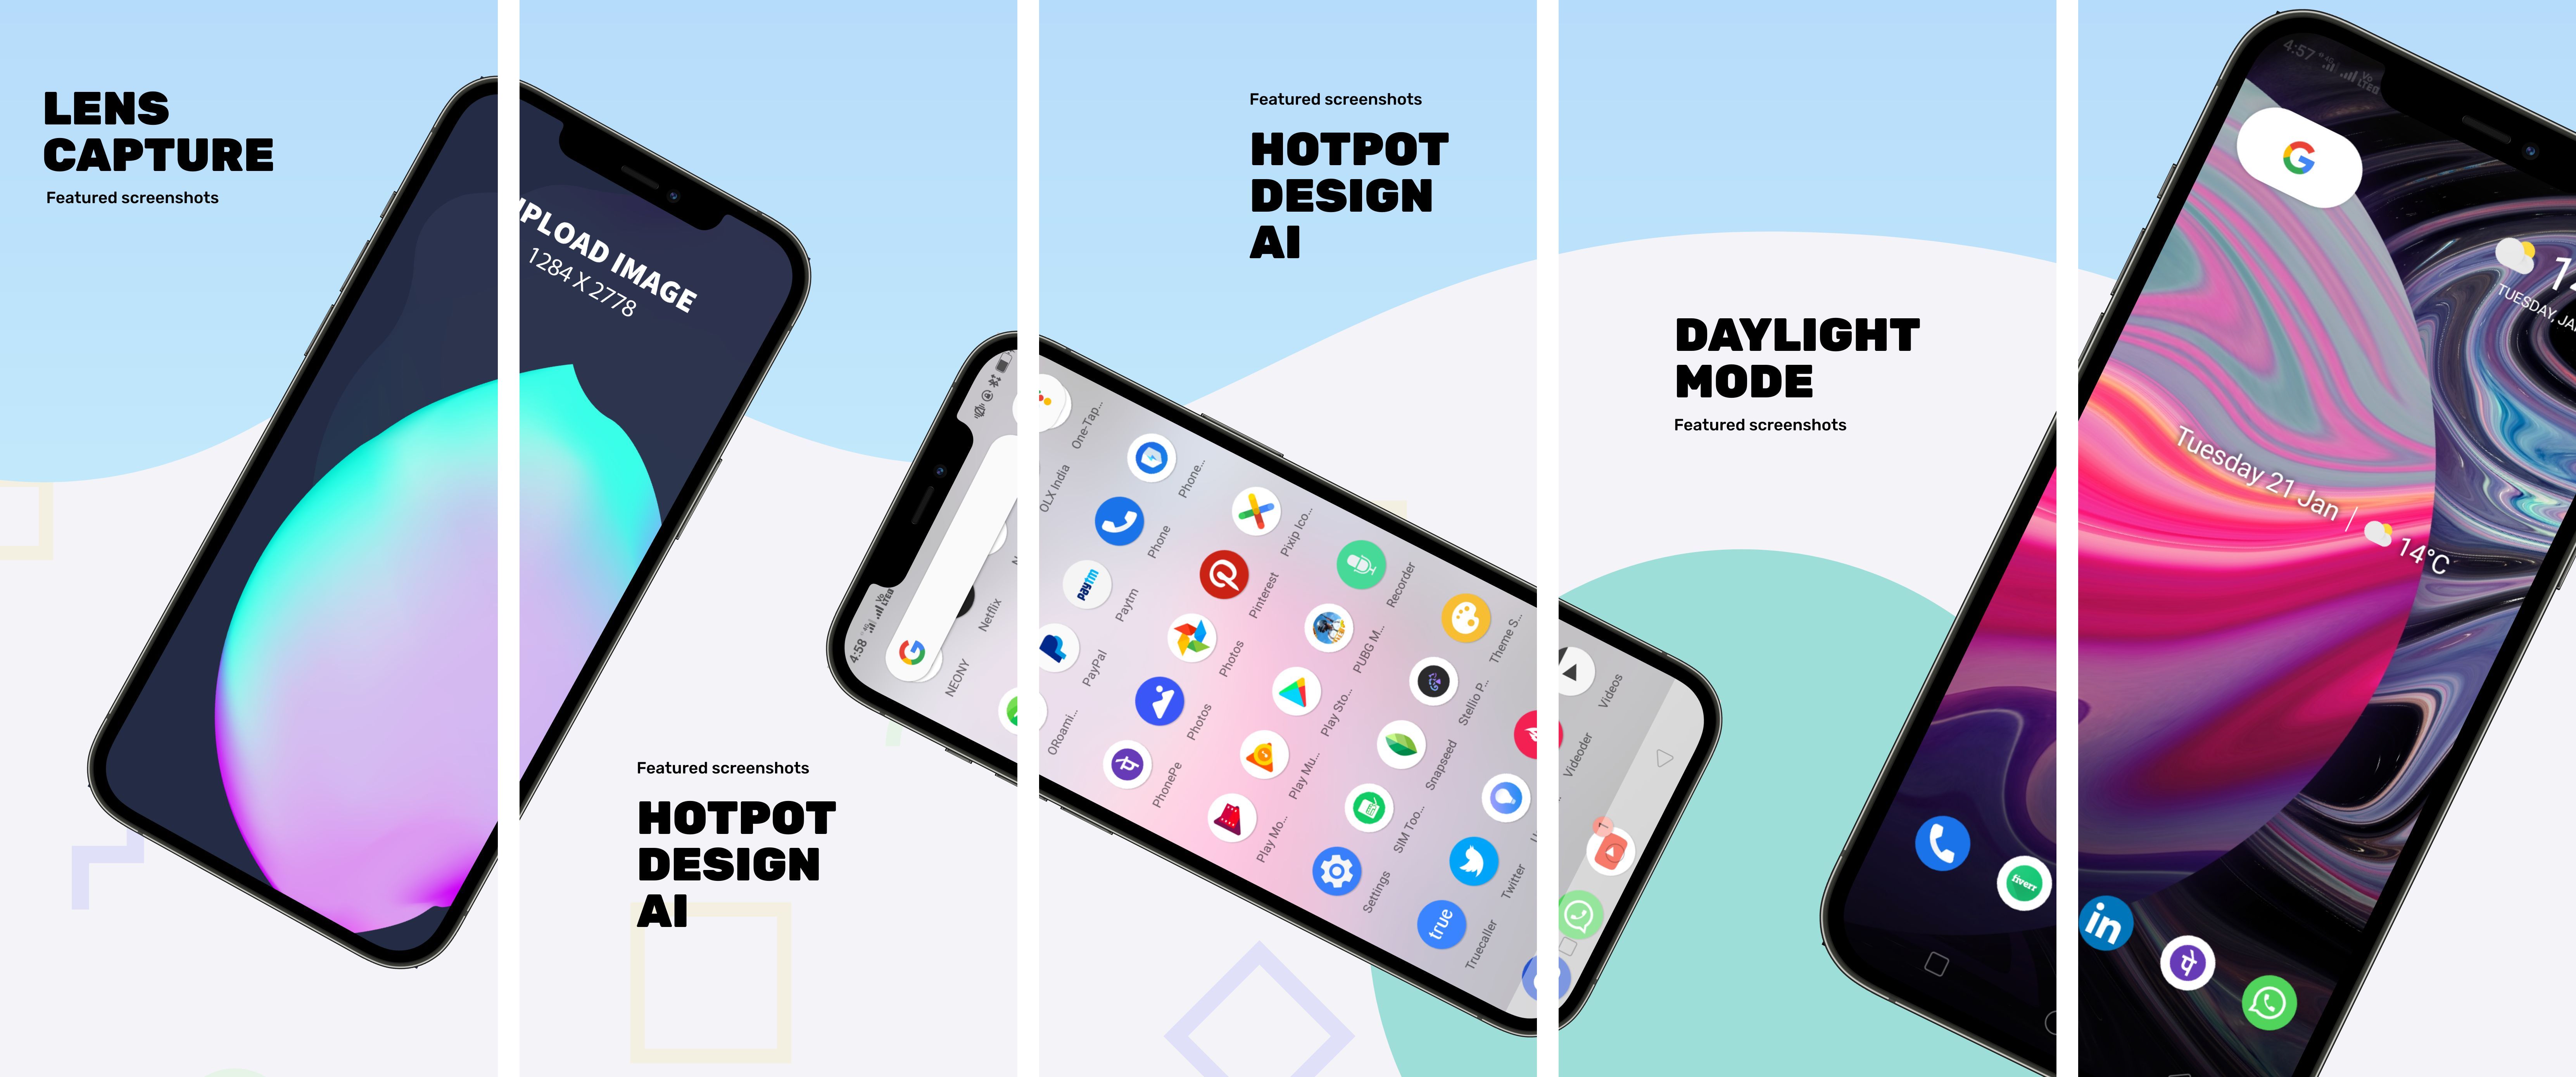 This is an App Store panorama screenshot comprised of five individual screenshots. Three rotated iPhone XS Max frames punctuate the panorama in a decorative and arresting style while concise captions accent the design with descriptions of app functionality and benefits.